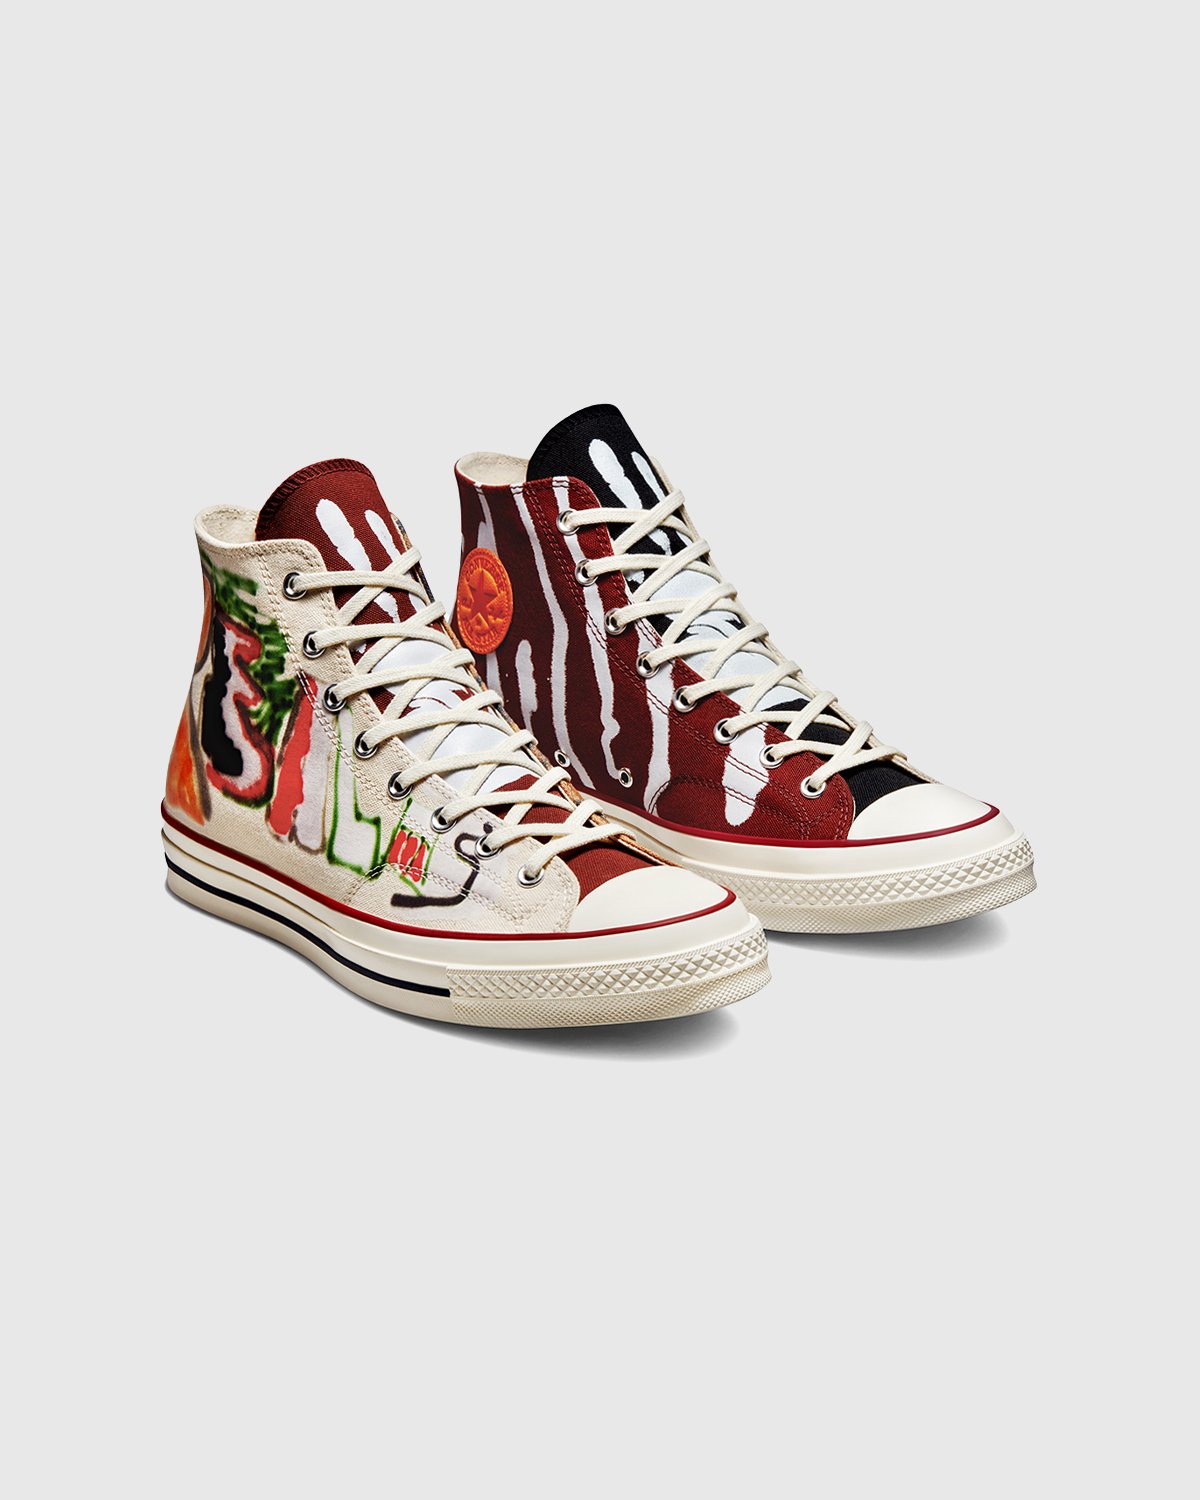 Converse x Come Tees - Chuck 70 Hi White/Multi/Egret - Footwear - Red - Image 3